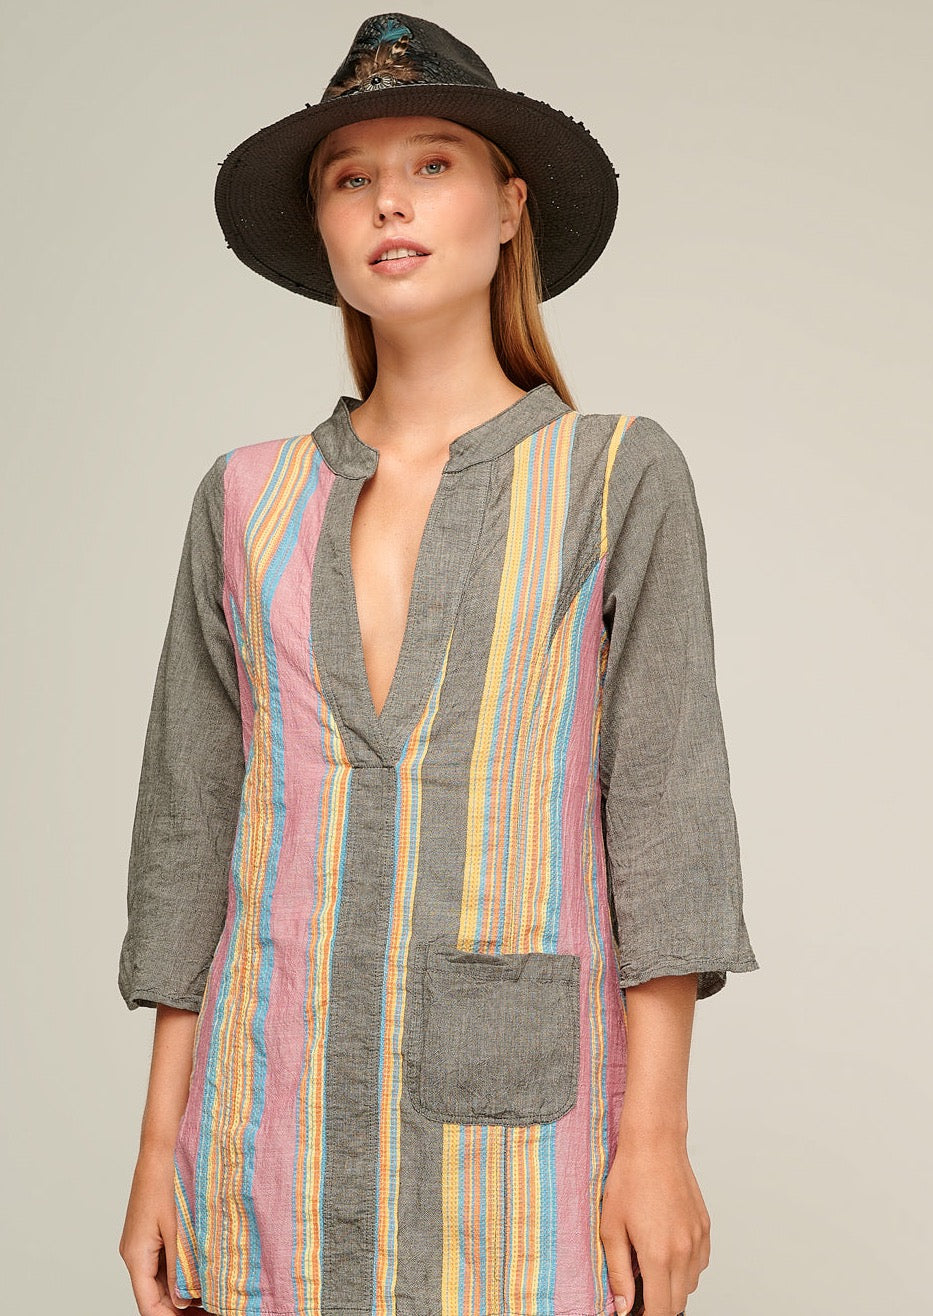 PEARL SS22-AXELLE STRIPED BLOUSE-JUSTBRAZIL